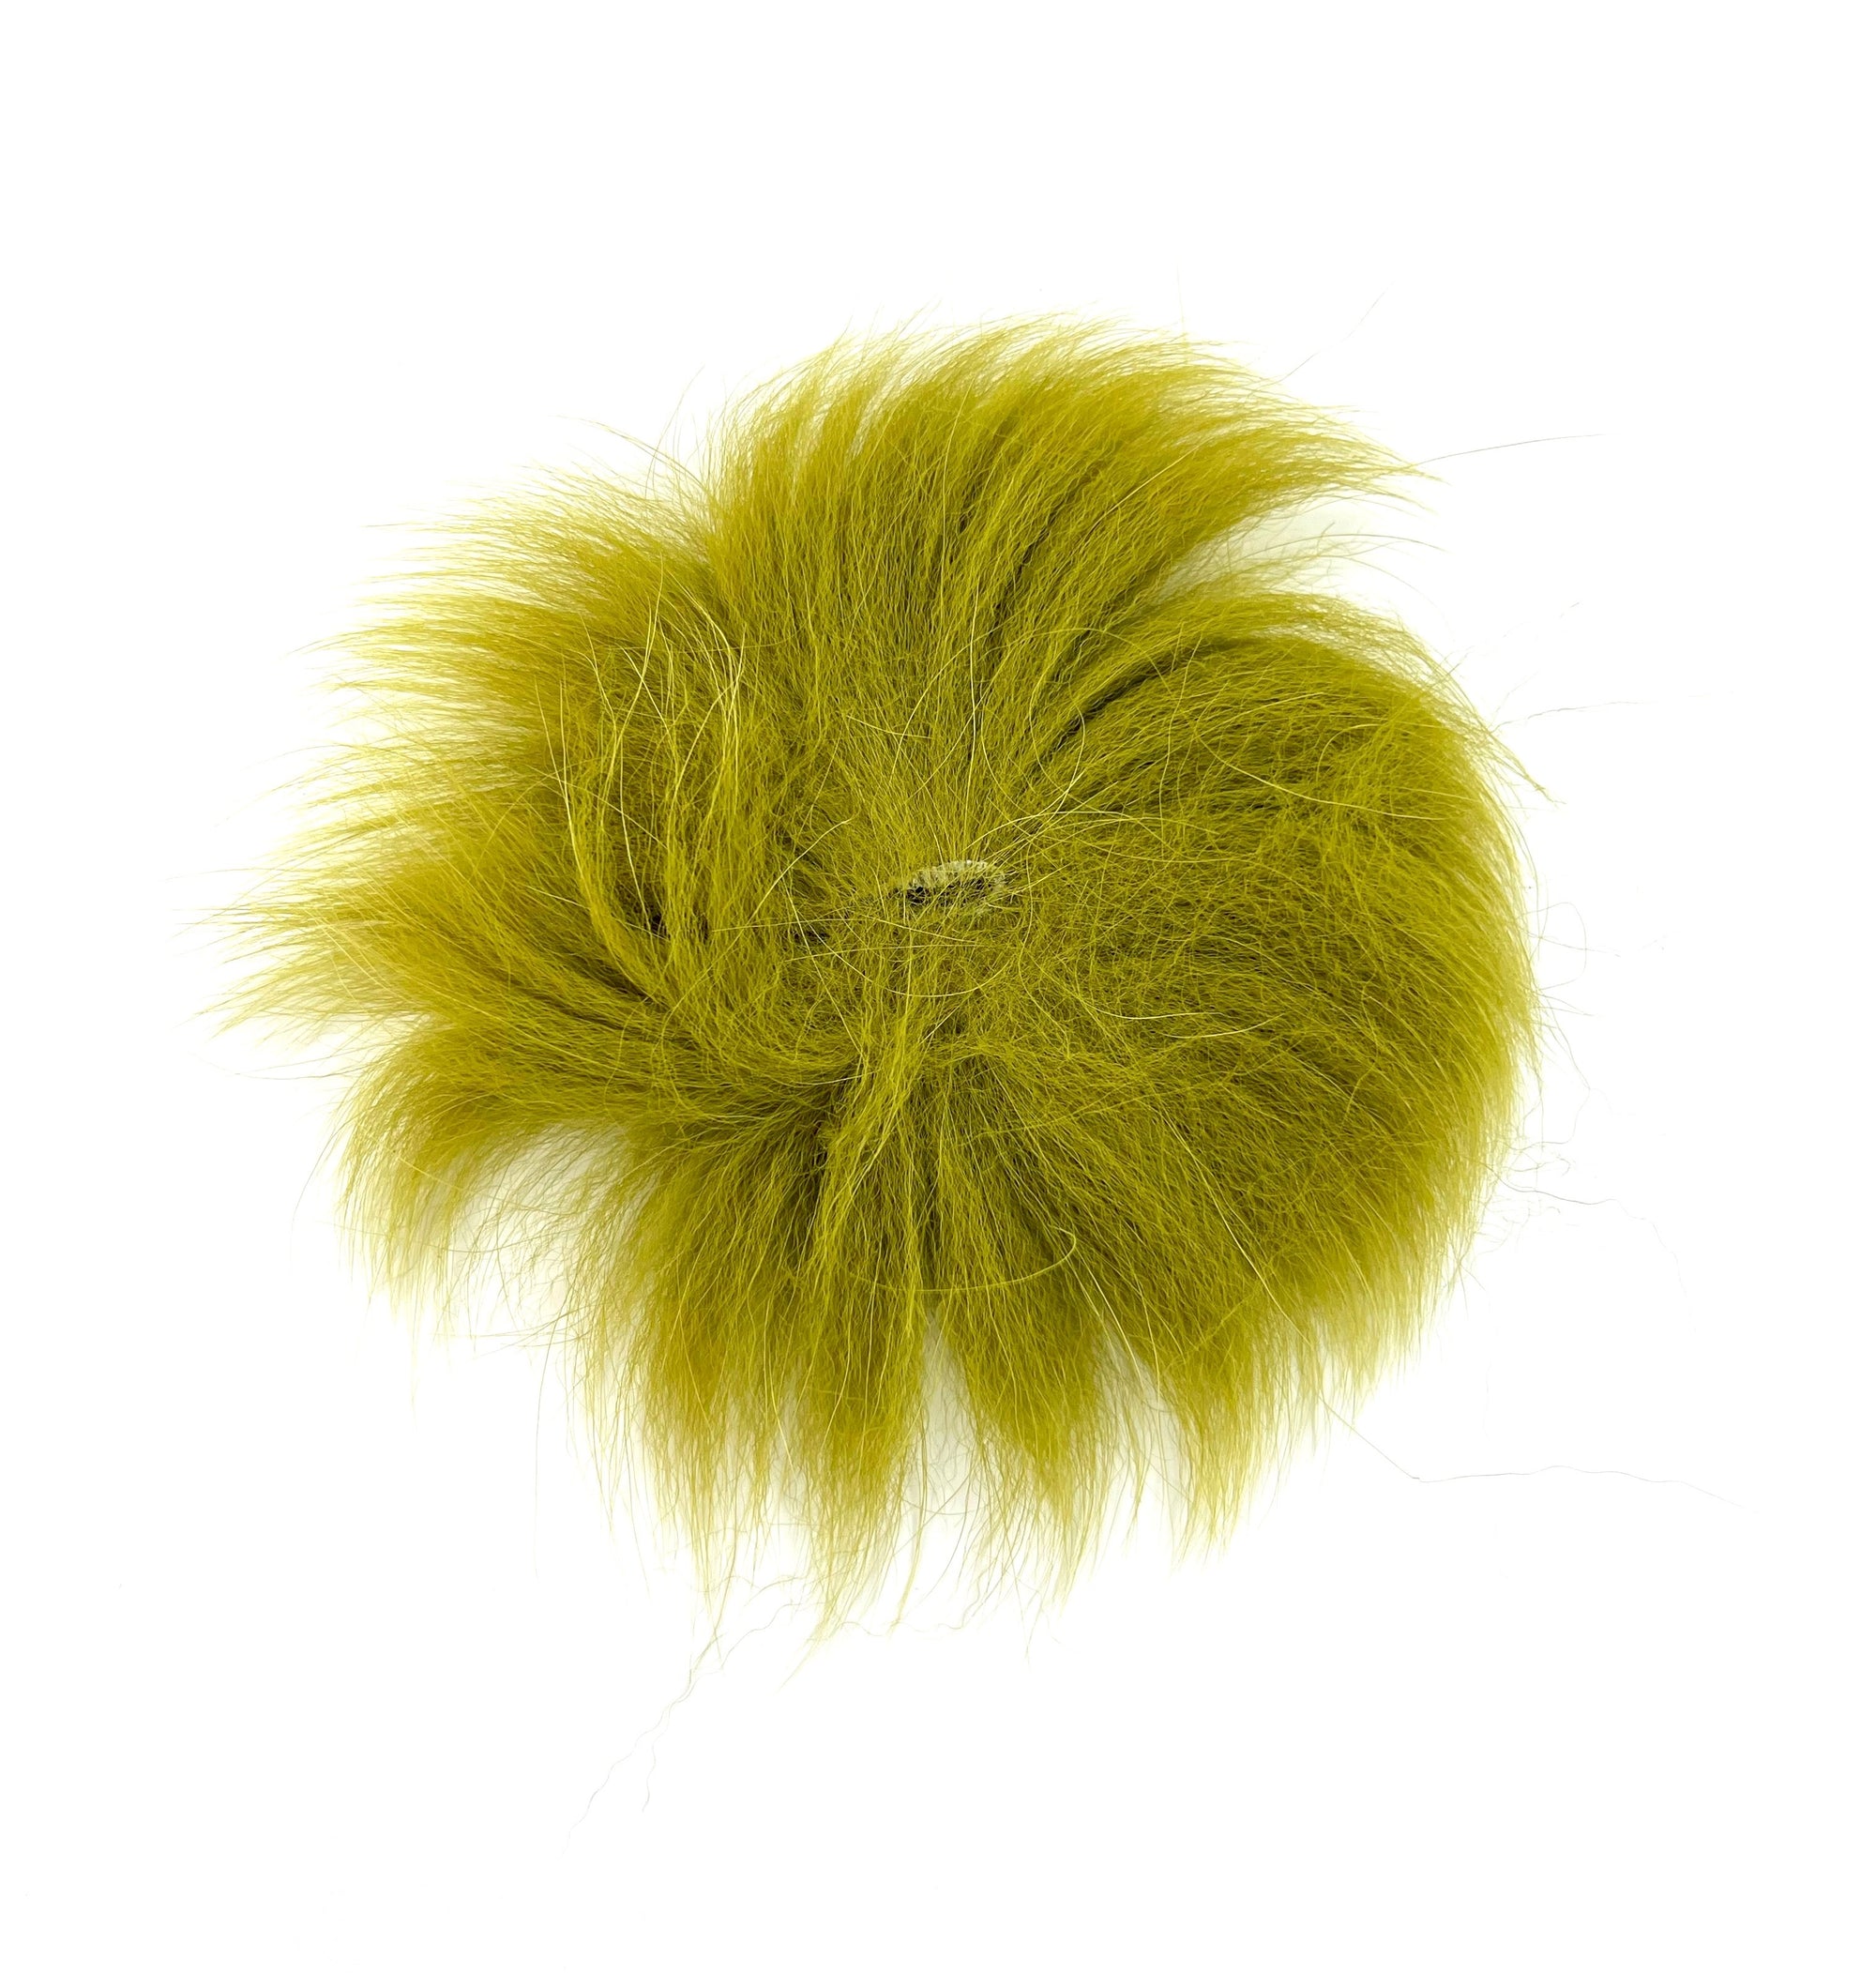 Olive Green and Yellow large Pom Poms